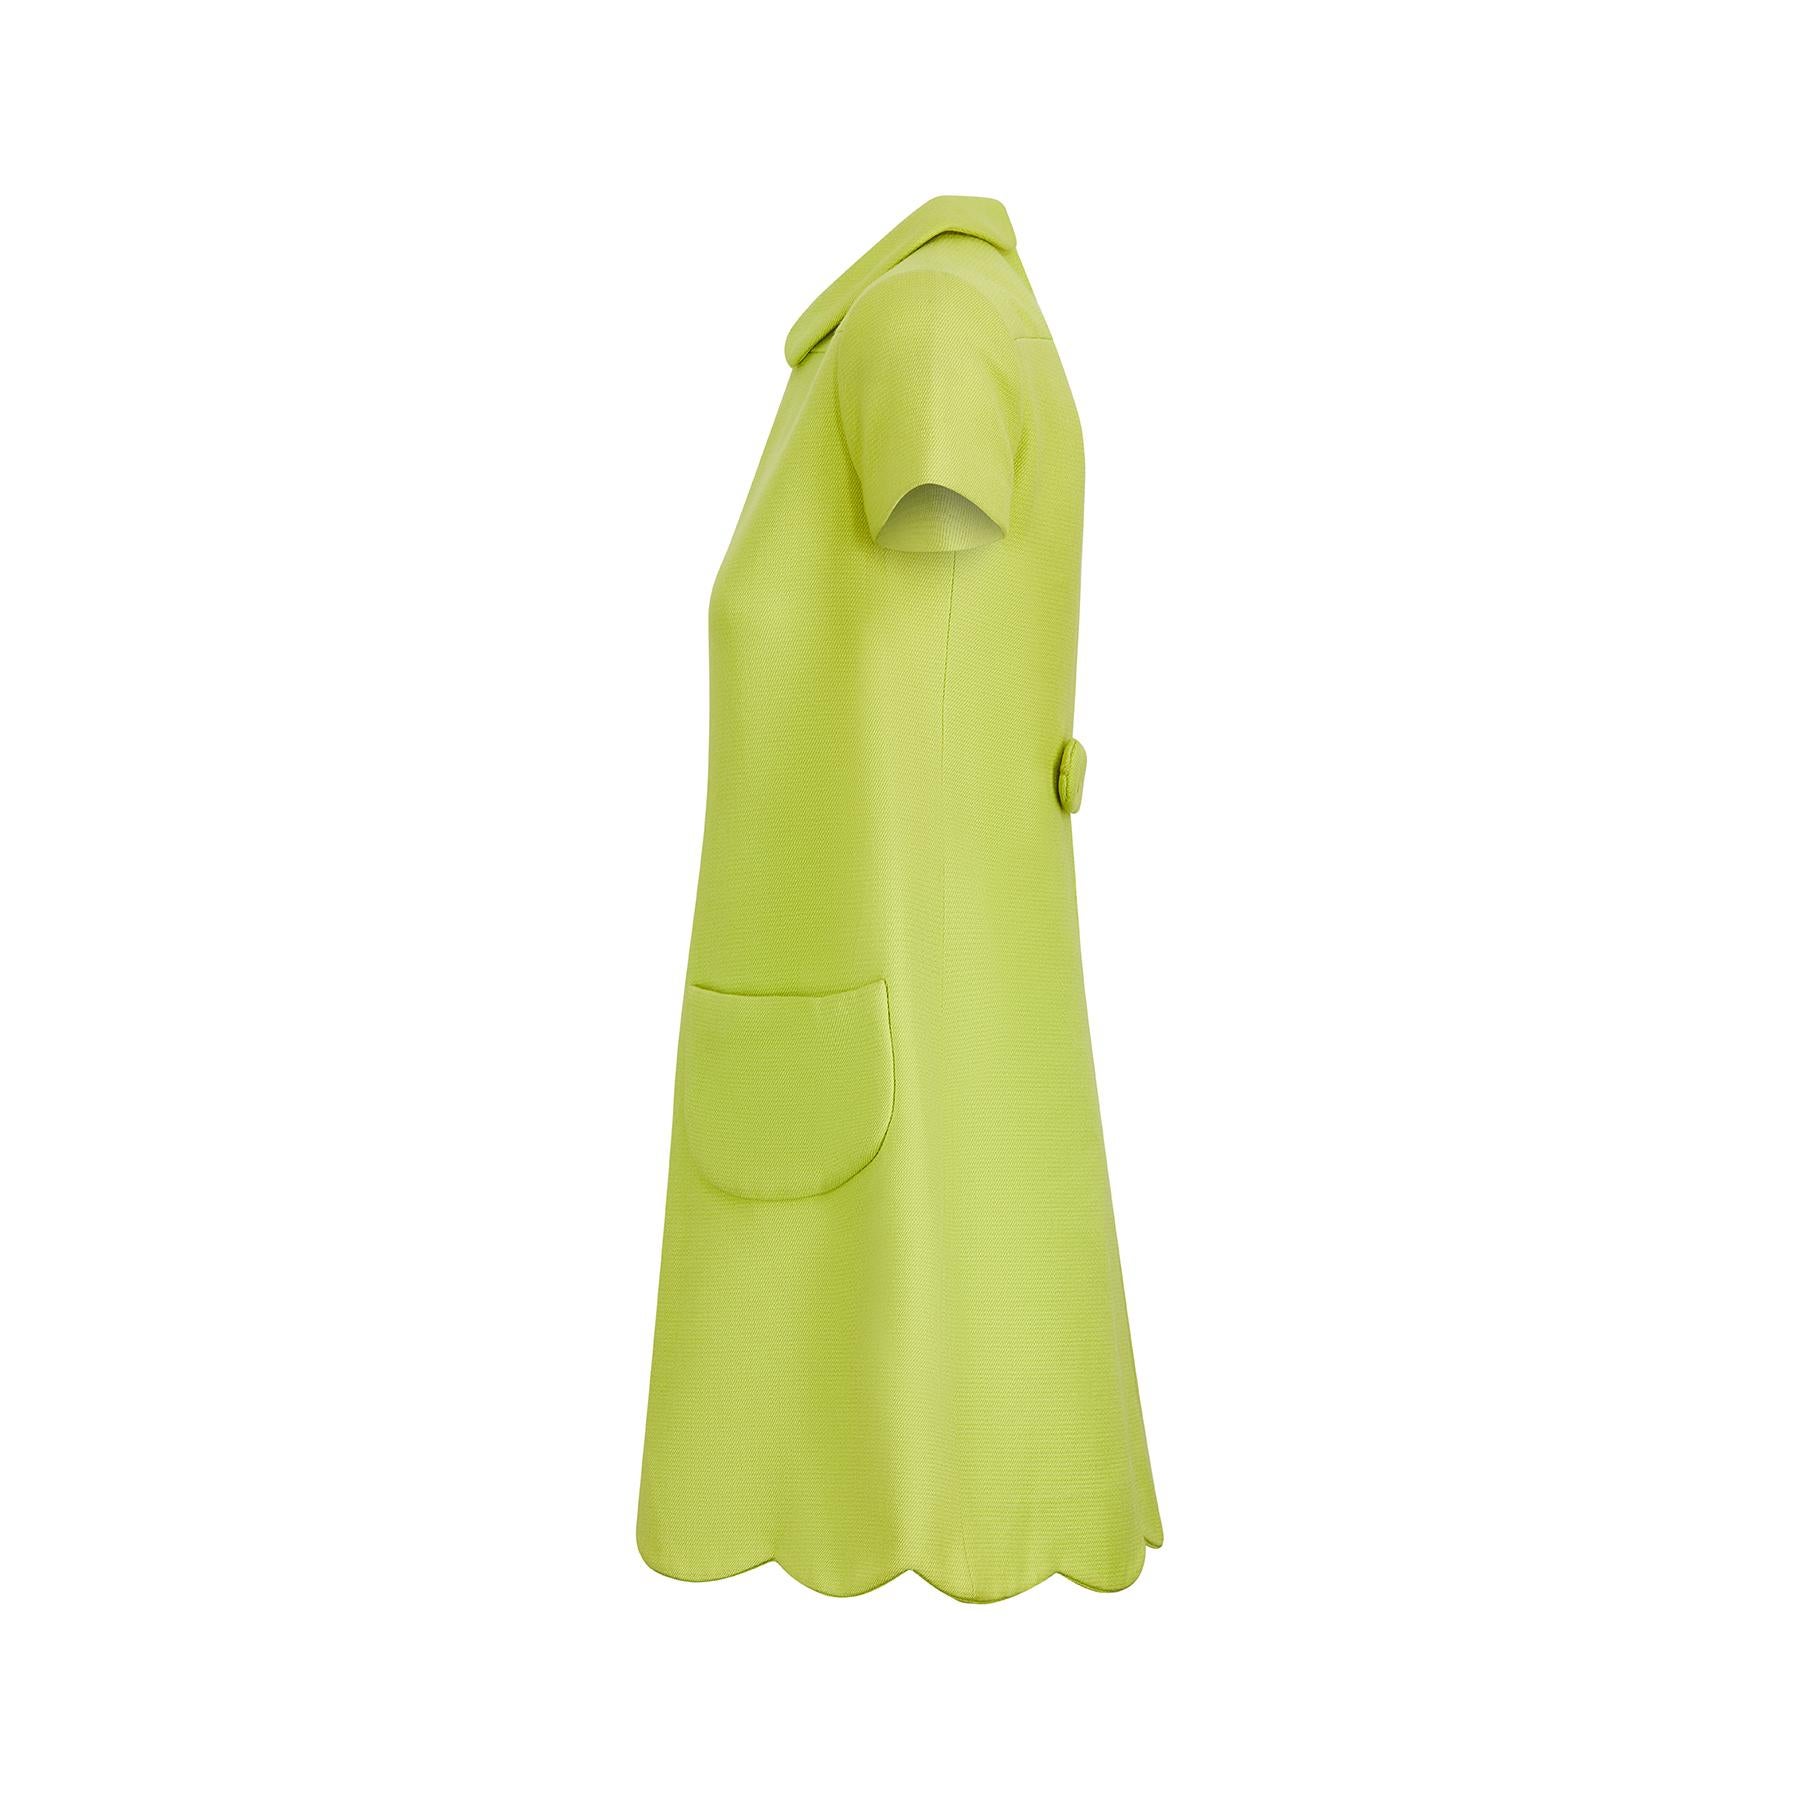 Documented 1960s Courreges haute couture green mod dress.  Andre Courreges was already a fashion design superstar when this dress featured in Vogue in 1968 and the futuristic tailoring is synonymous with the designer who worked for Balenciaga during